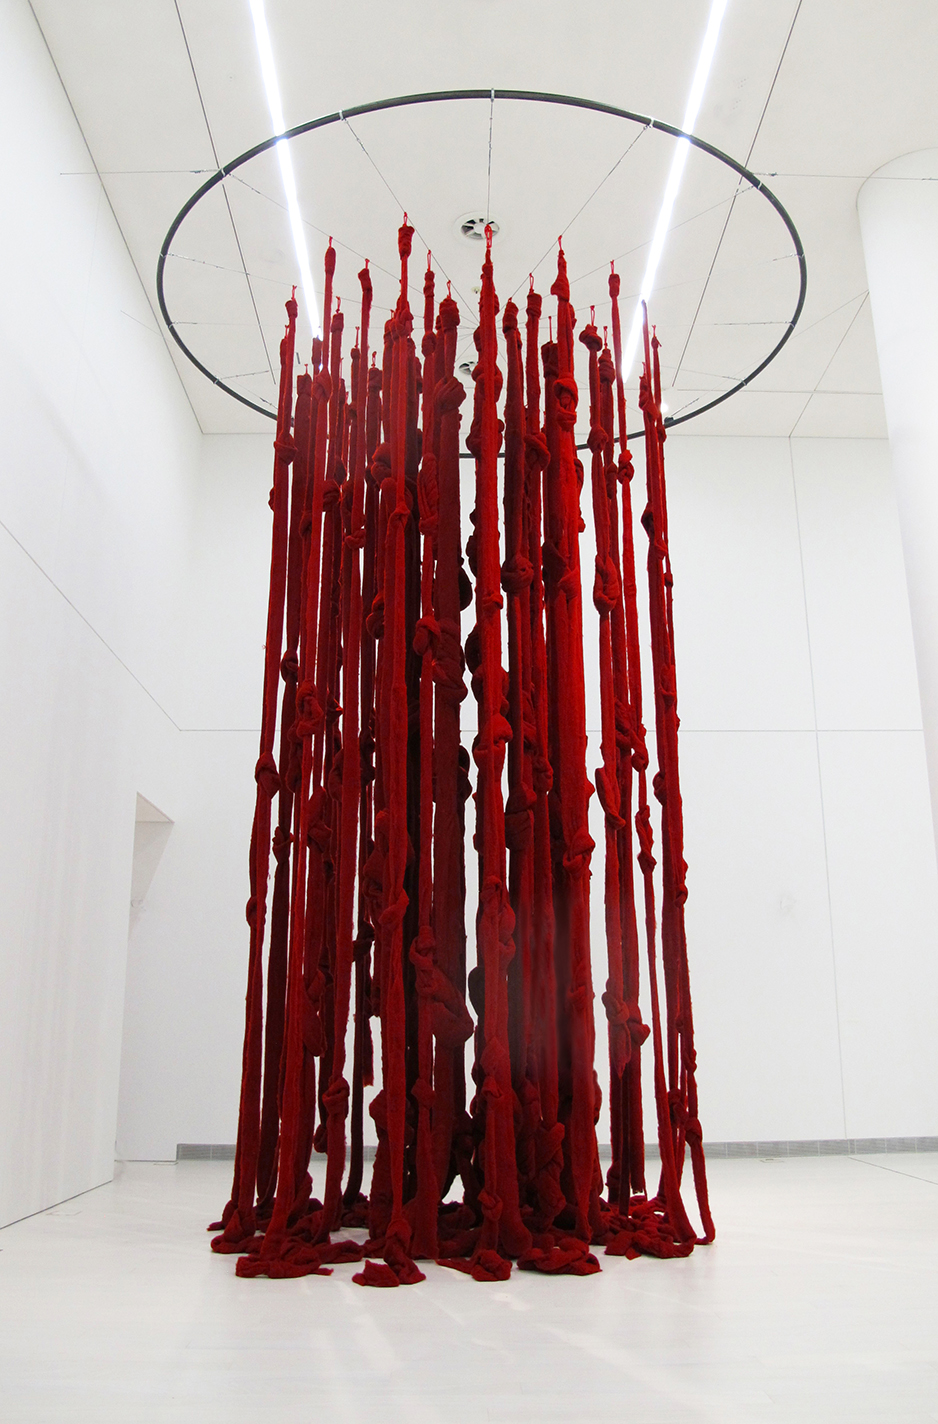 Quipu Womb, Athens by Cecilia Vicuña, acquired by Tate, London from England & Co.